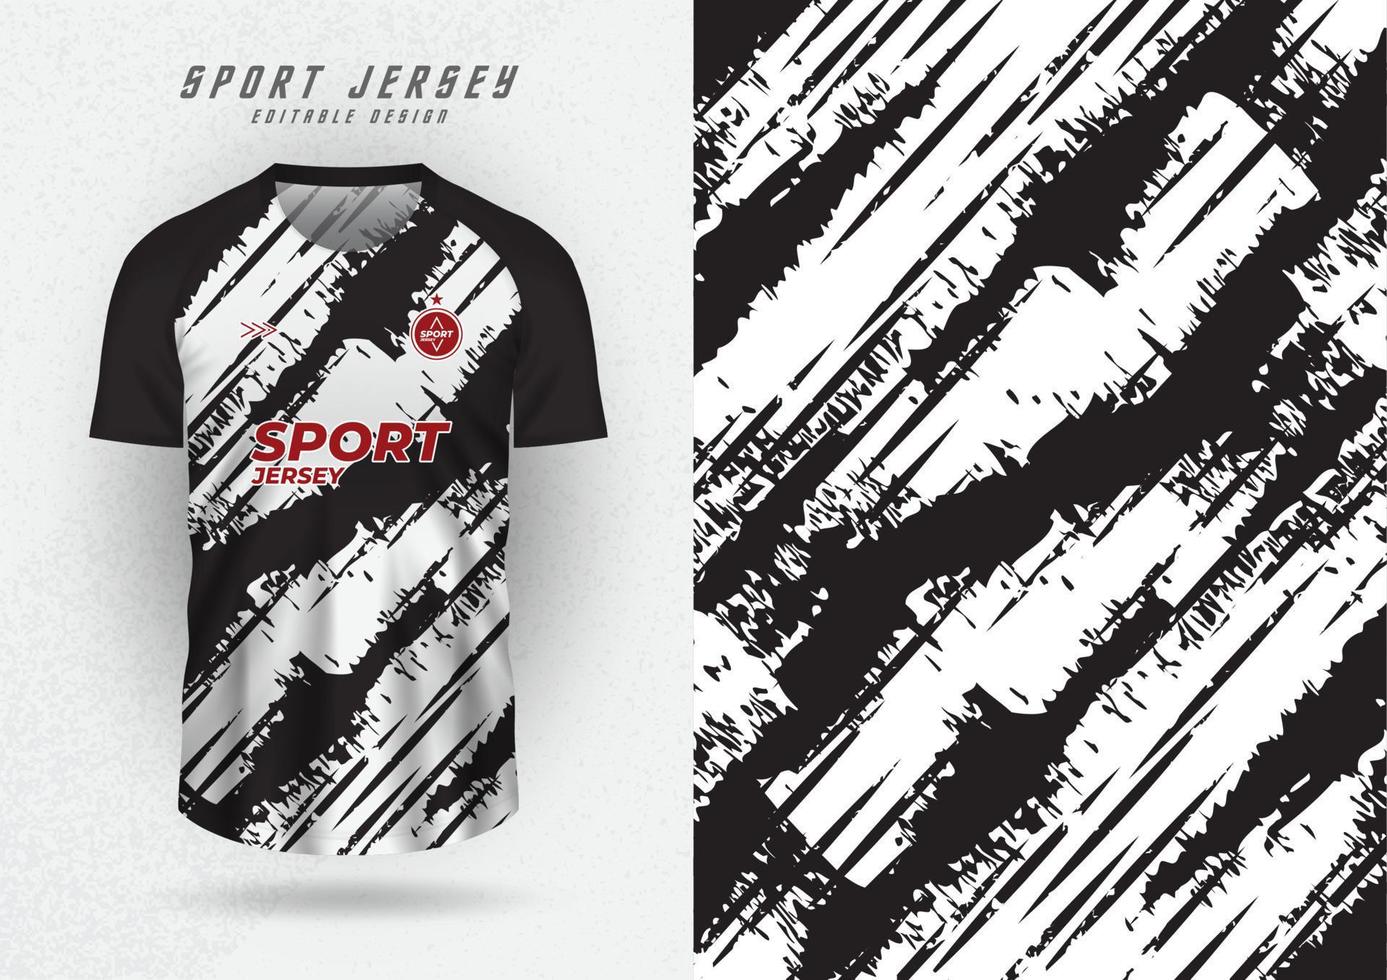 background for sports jersey soccer jersey running jersey racing jersey brush pattern black and white vector